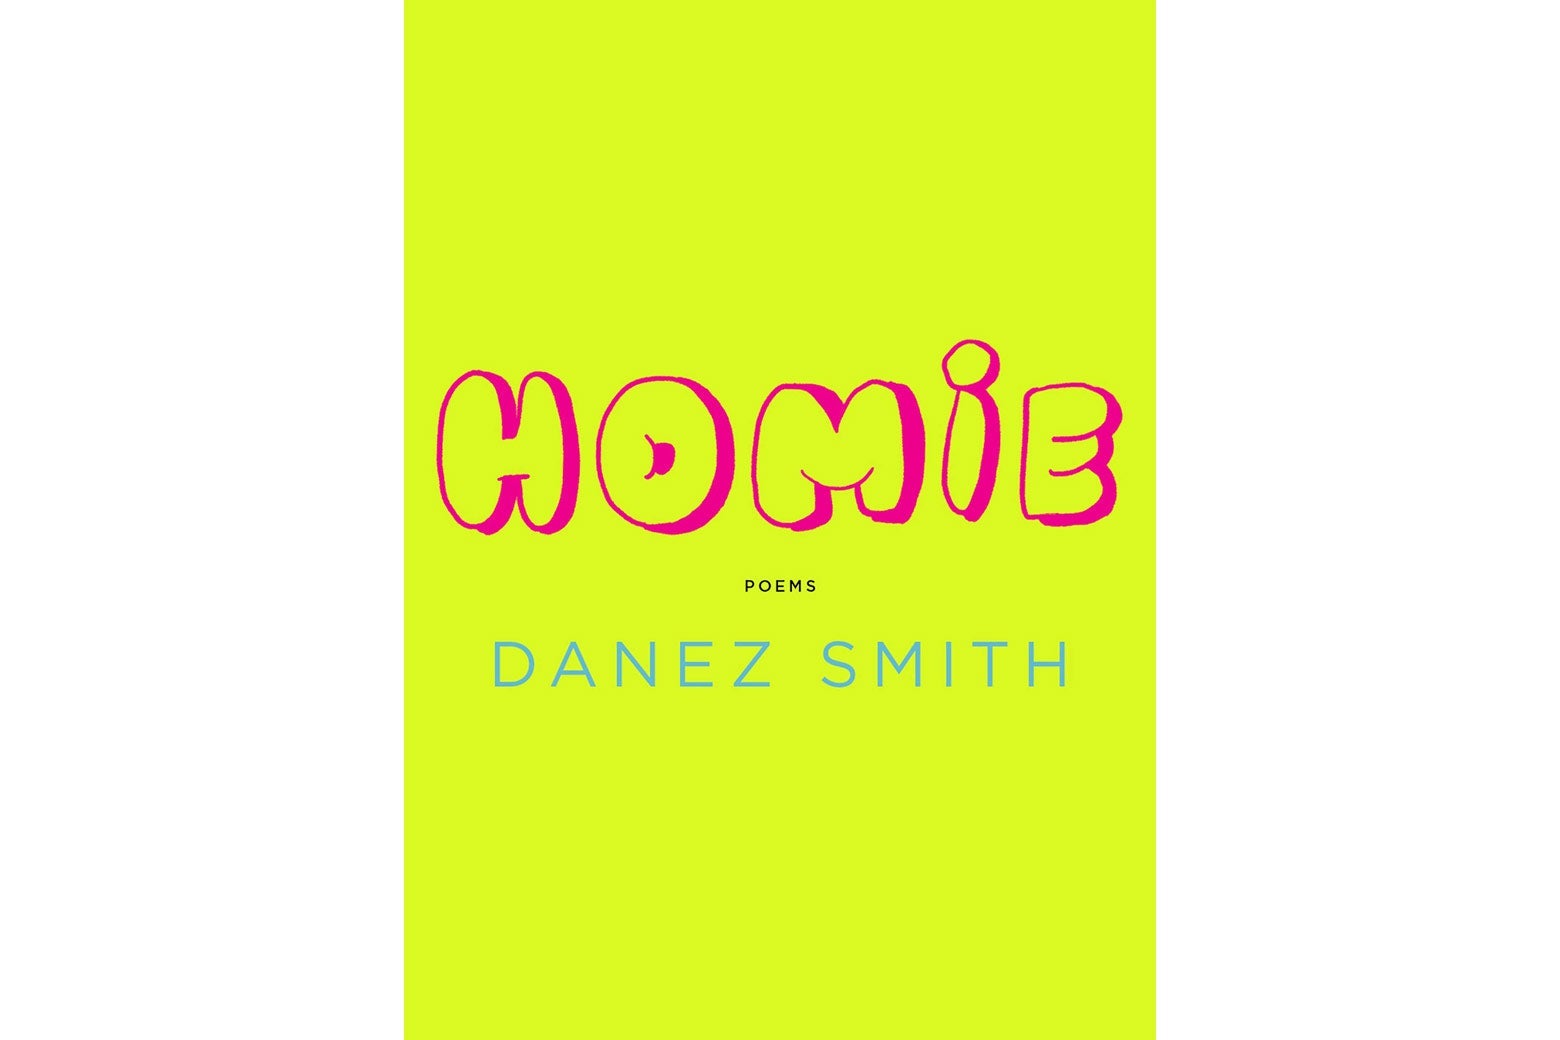 The cover of Homie.